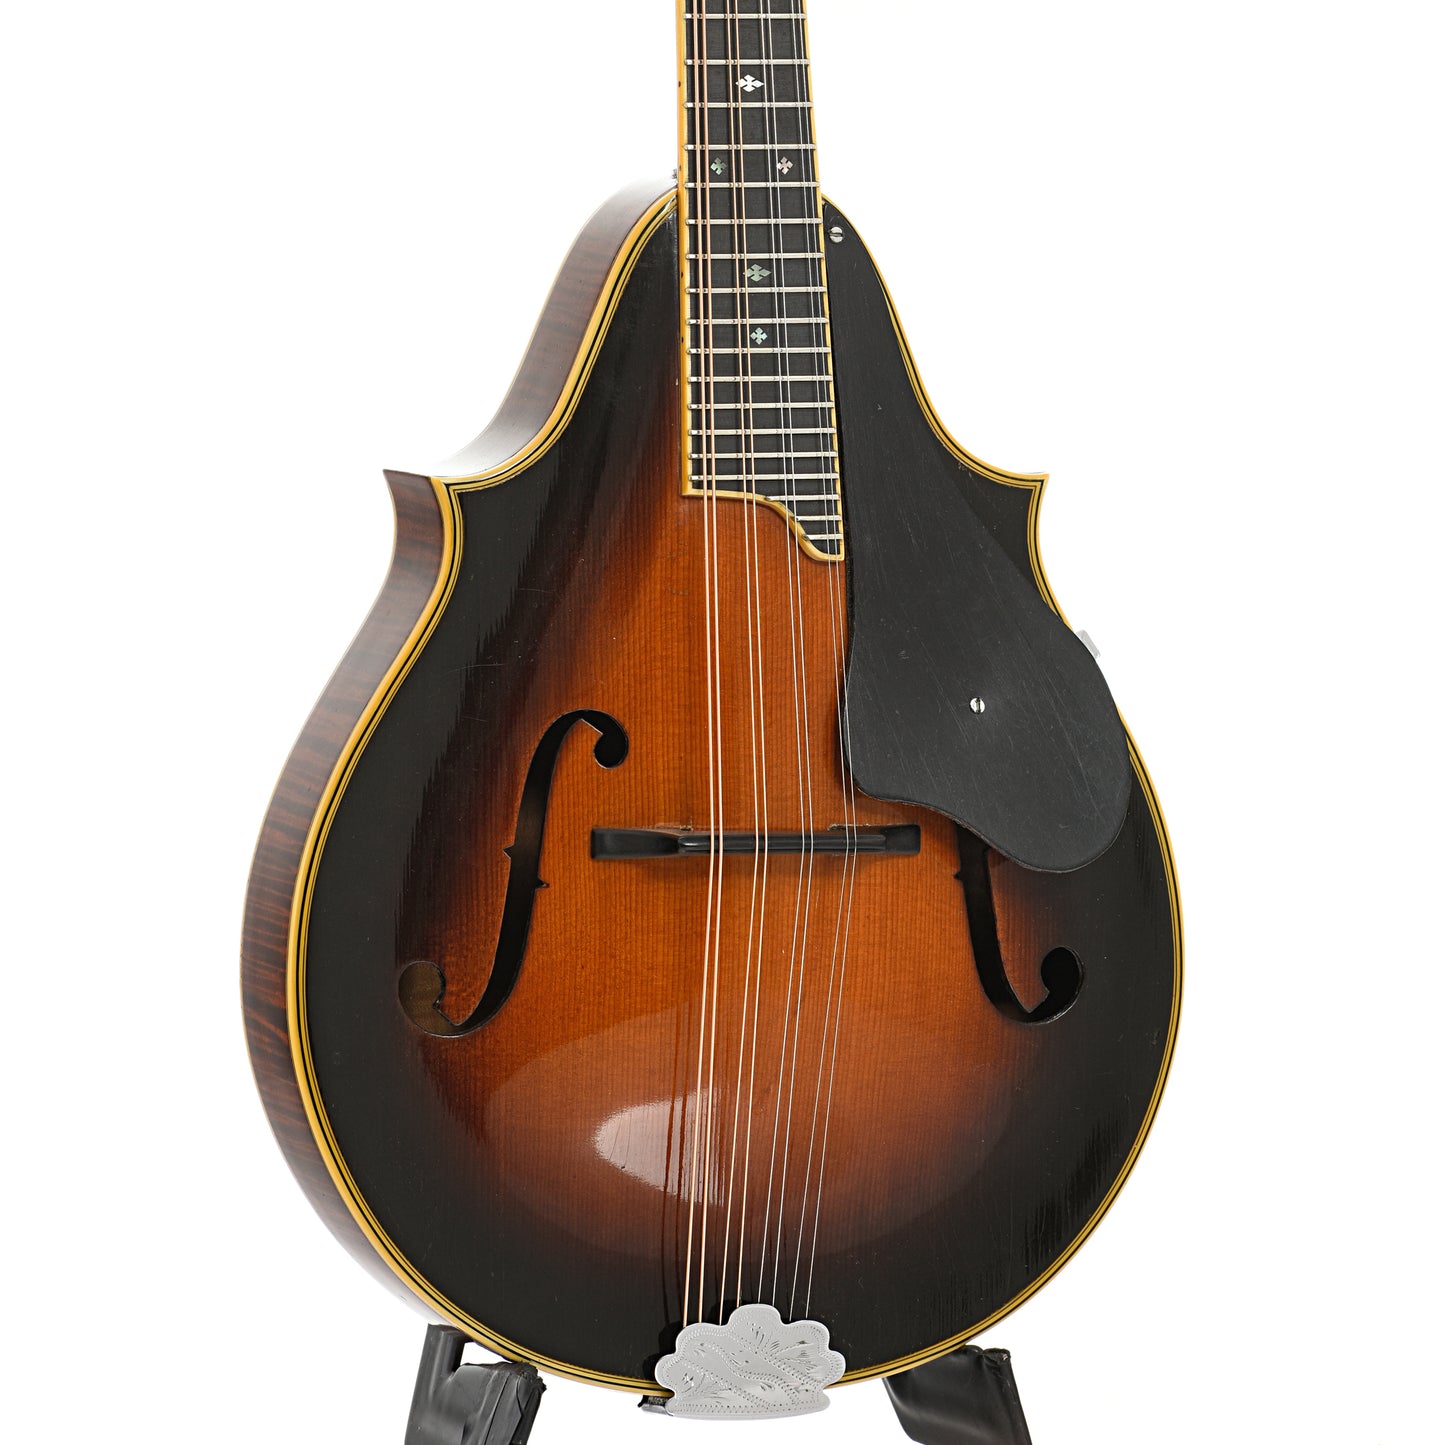 Front and side of Martin Model 2-30 Mandolin (1936)